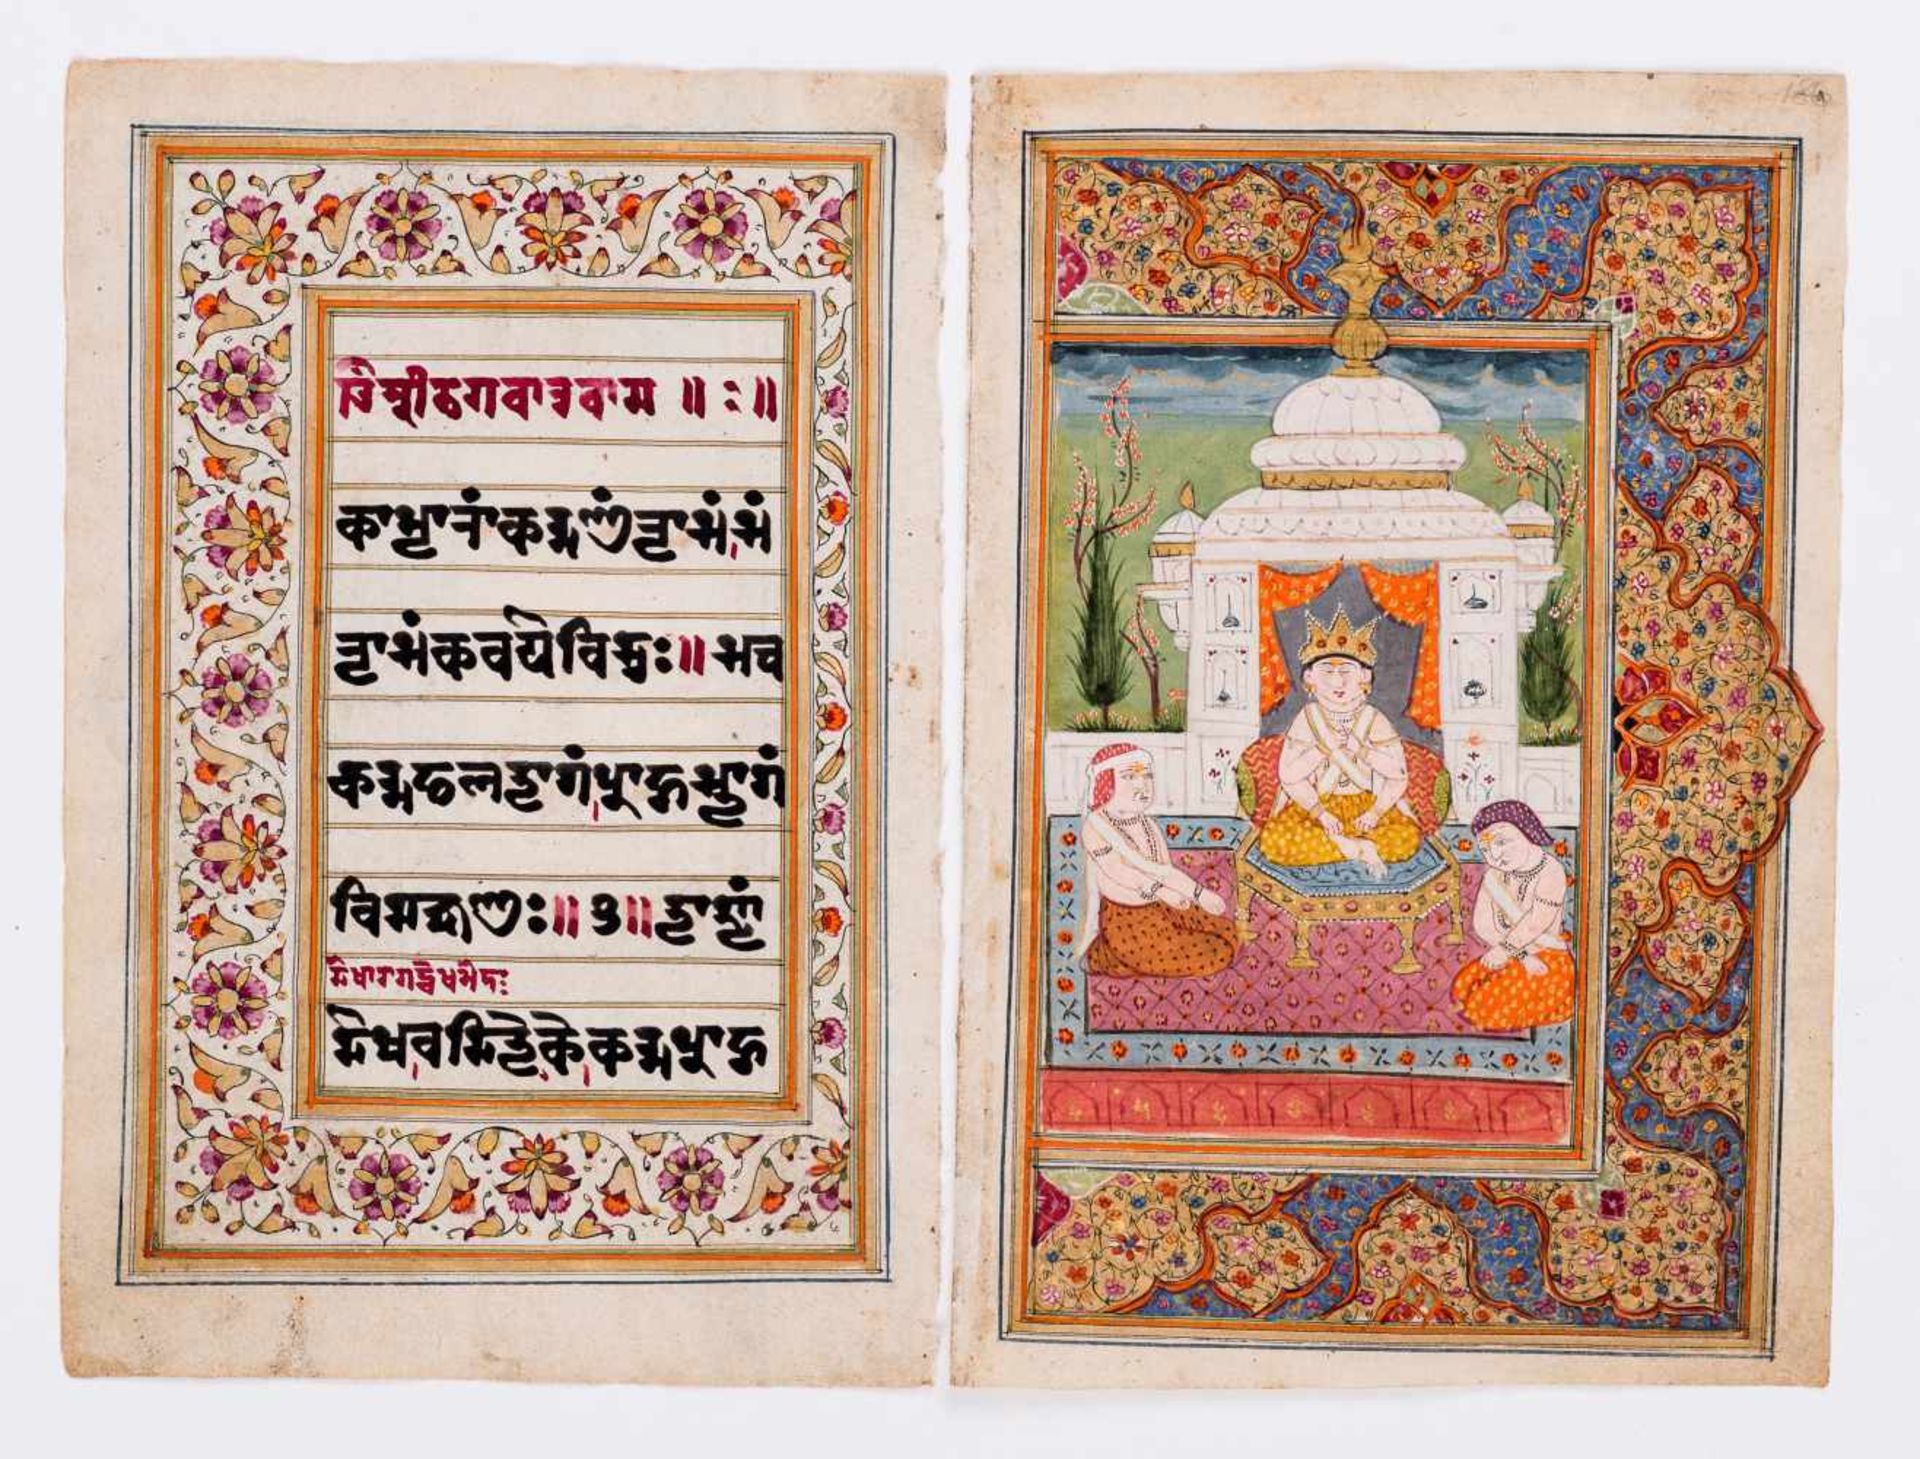 EIGHT MINIATURE PAINTINGS DEPICTING DEITIES - INDIA, 19th CENTURYMiniature painting with colors - Image 6 of 9